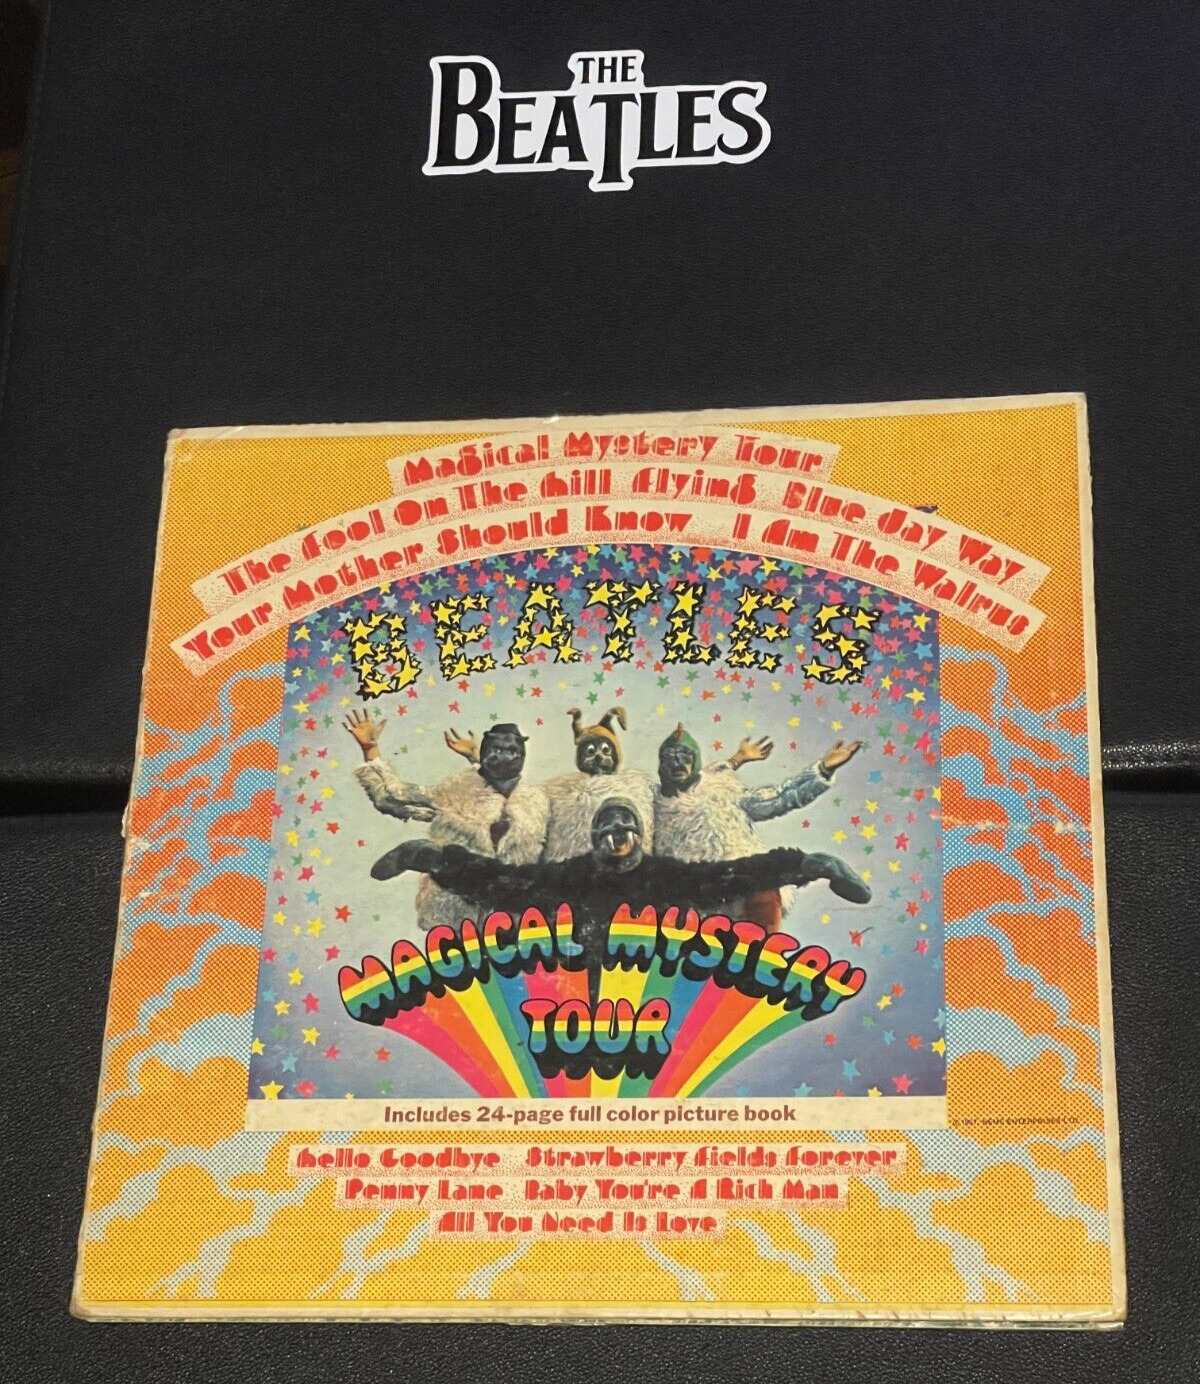 The Beatles Magical Mystery Tour Vinyl LP With Booklet 1967 * MONO COVER *